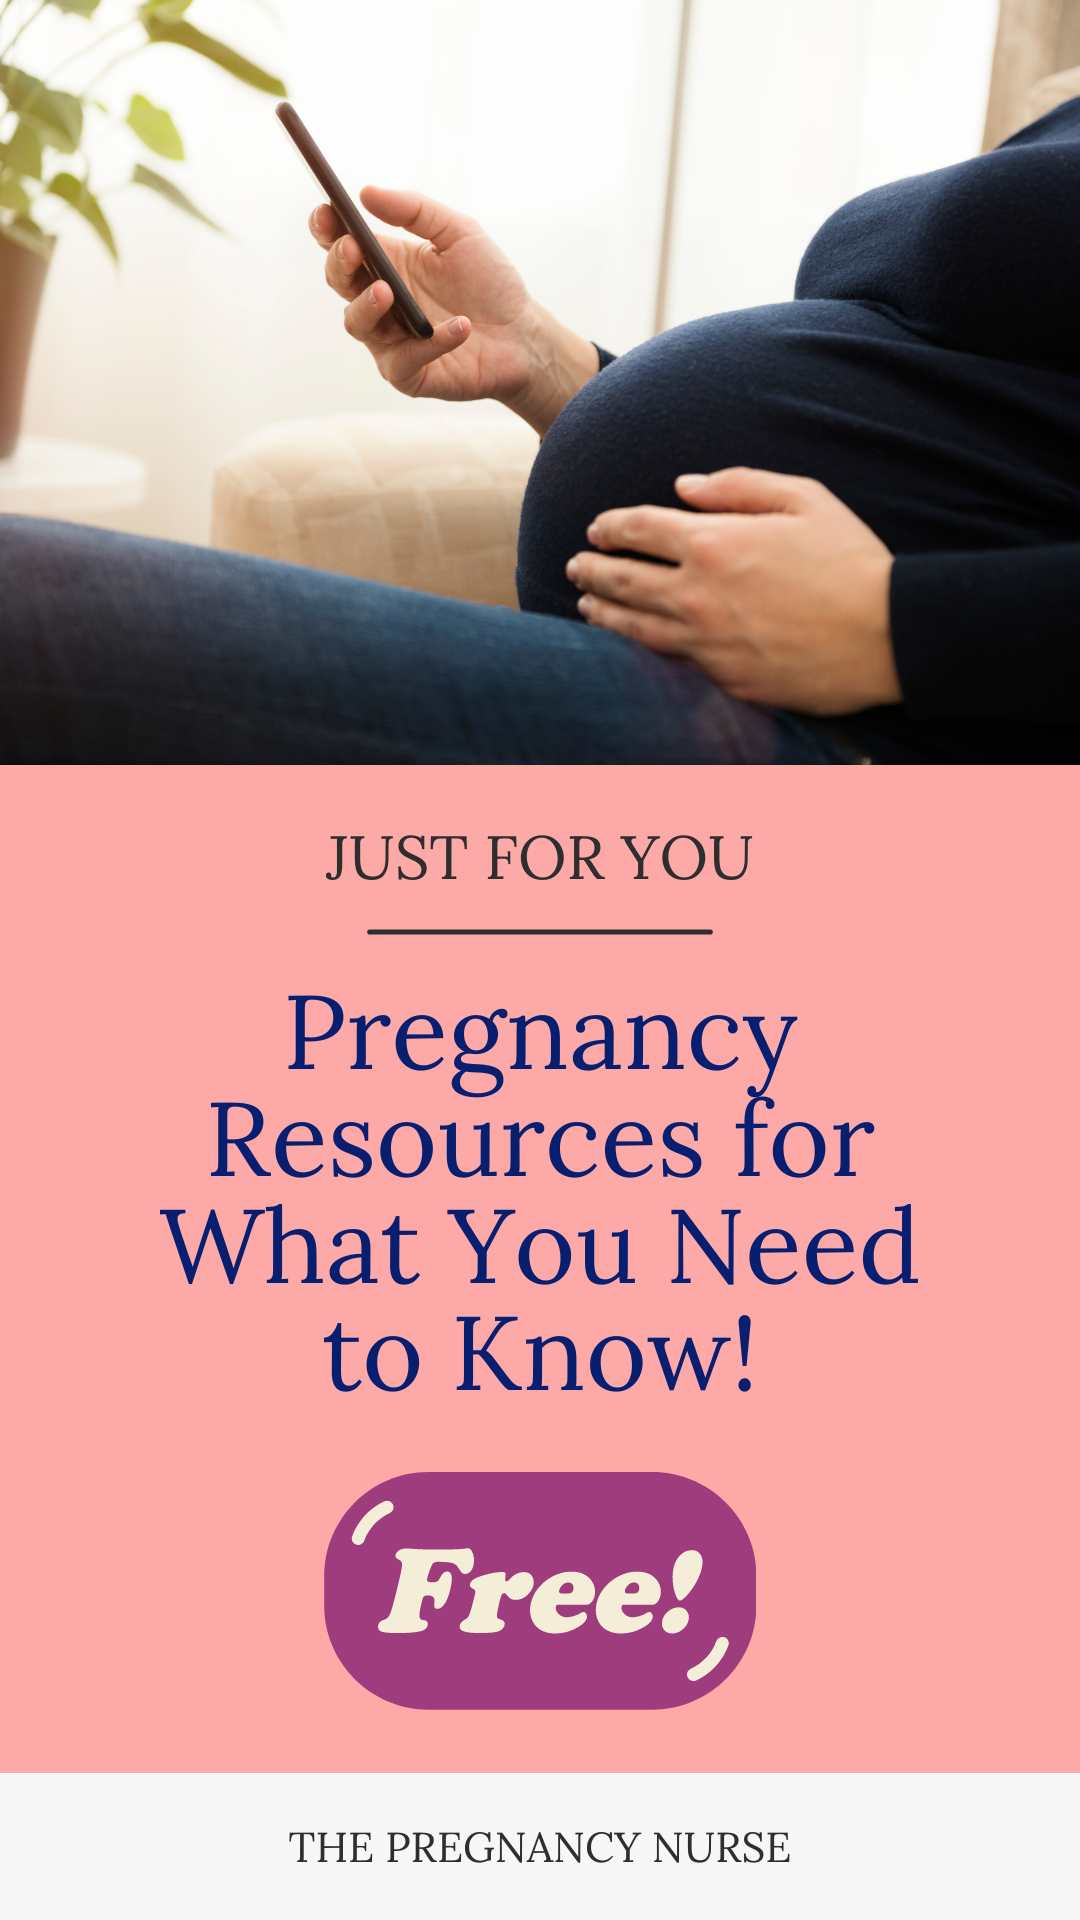 Pregnancy Resources for What You Need to Know!